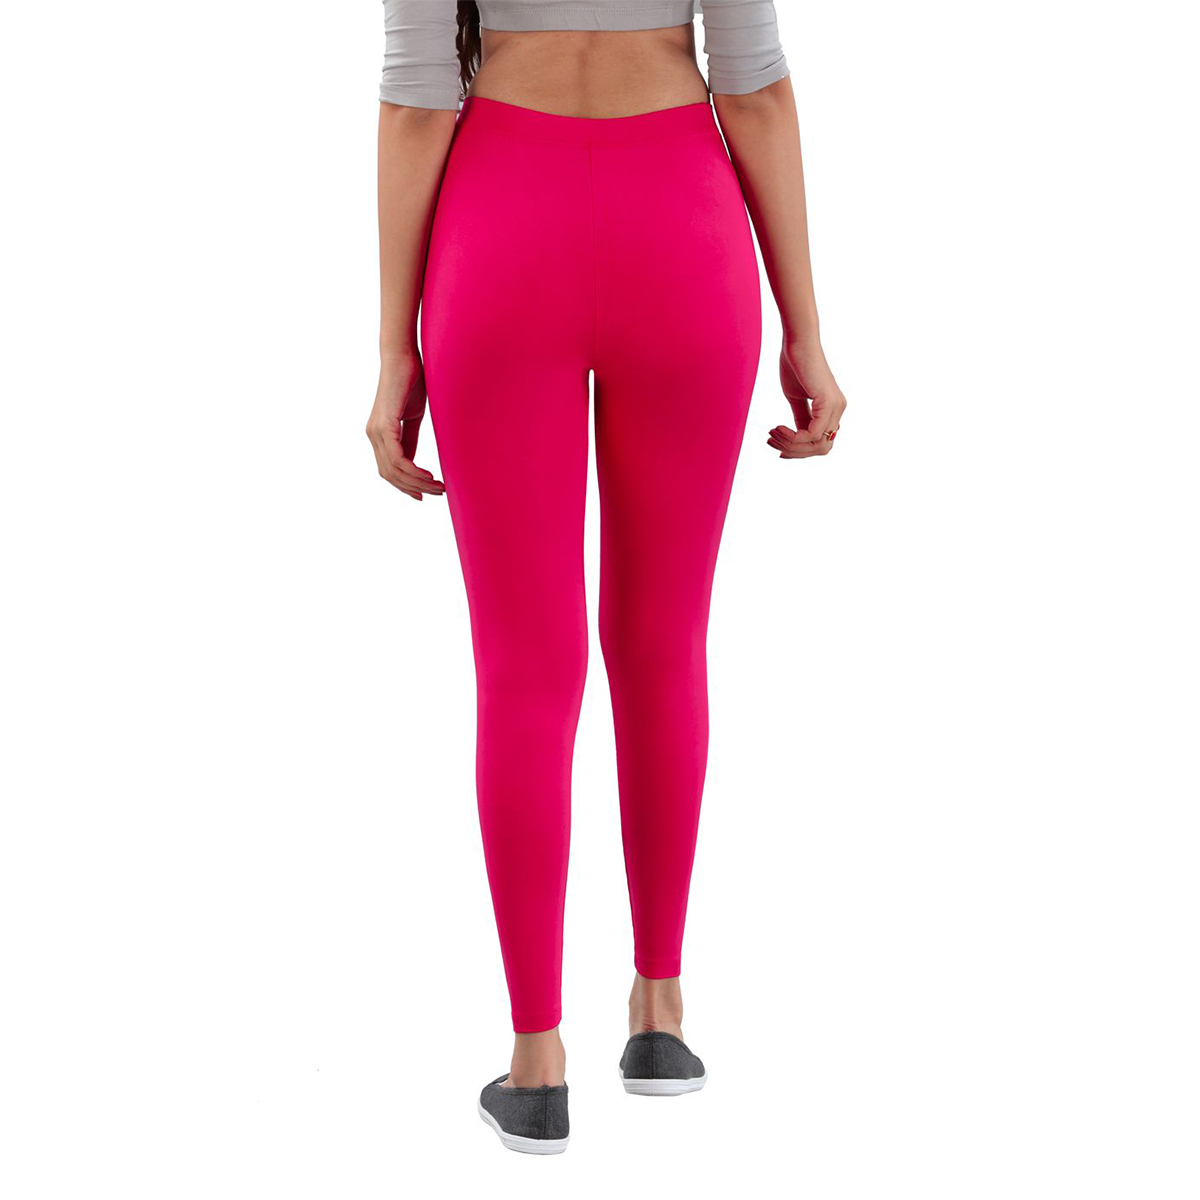 Twin Birds Women Solid Colour Viscose Ankle Length Legging with Signature Wide Waistband - Rose Red